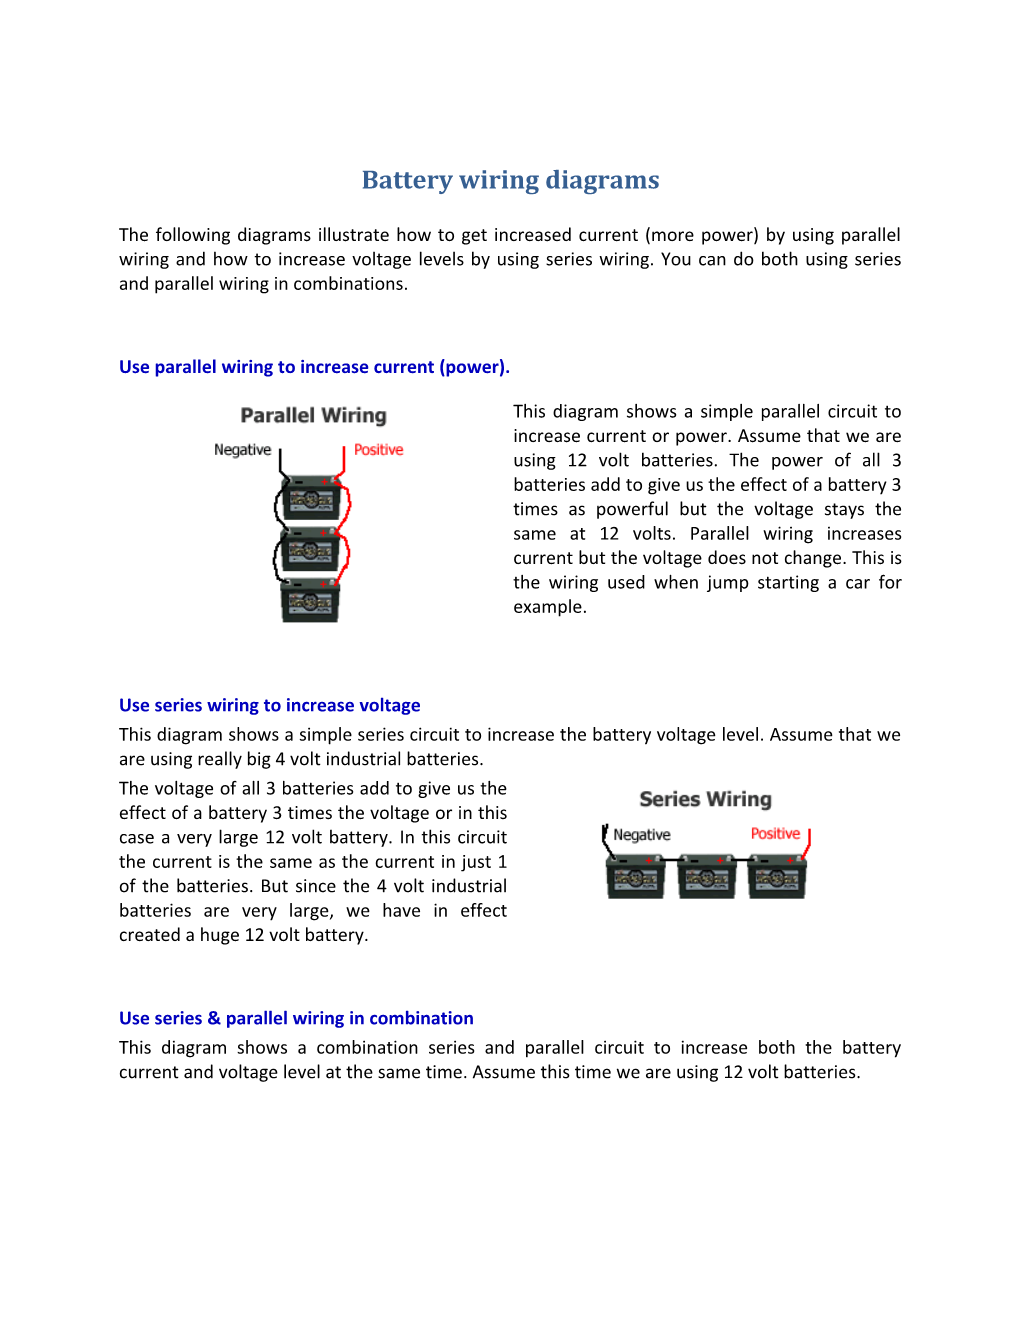 Battery Wiring Diagrams